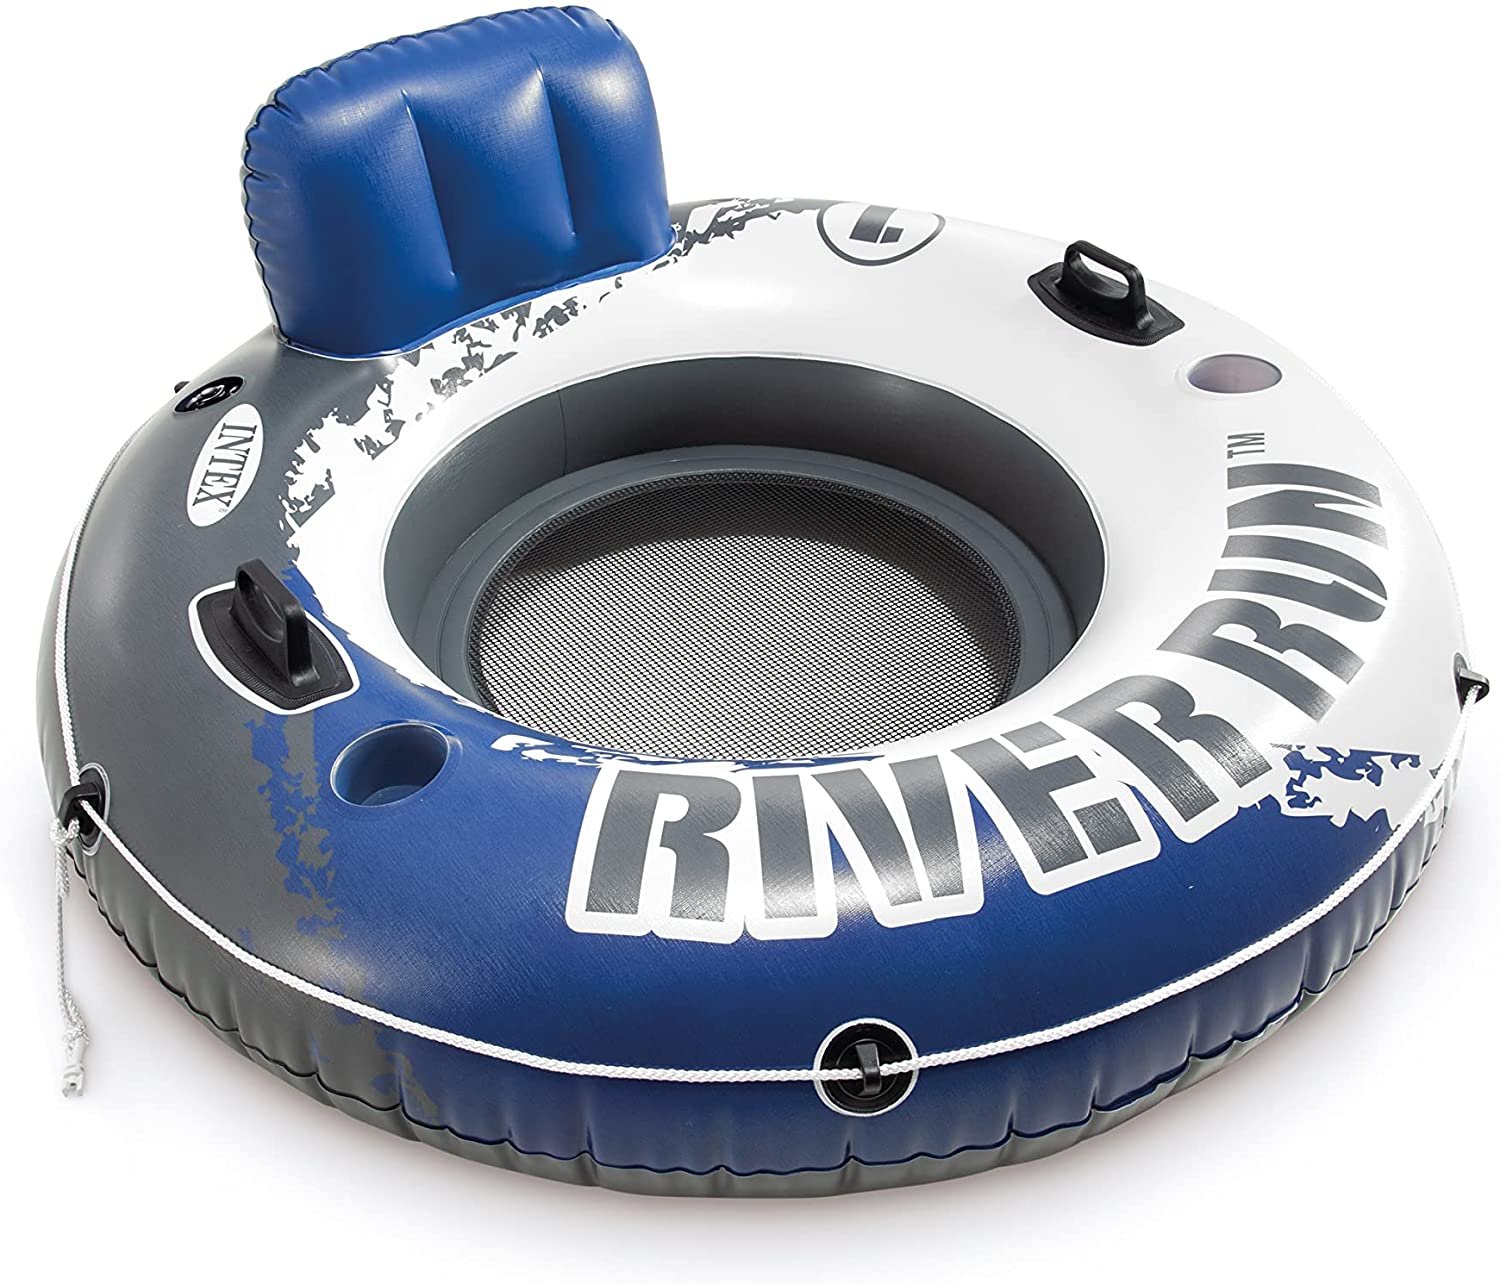 Inflatable Water Float, Intex River Run I Sport Lounge, 53 Blue - Free Shipping & Returns